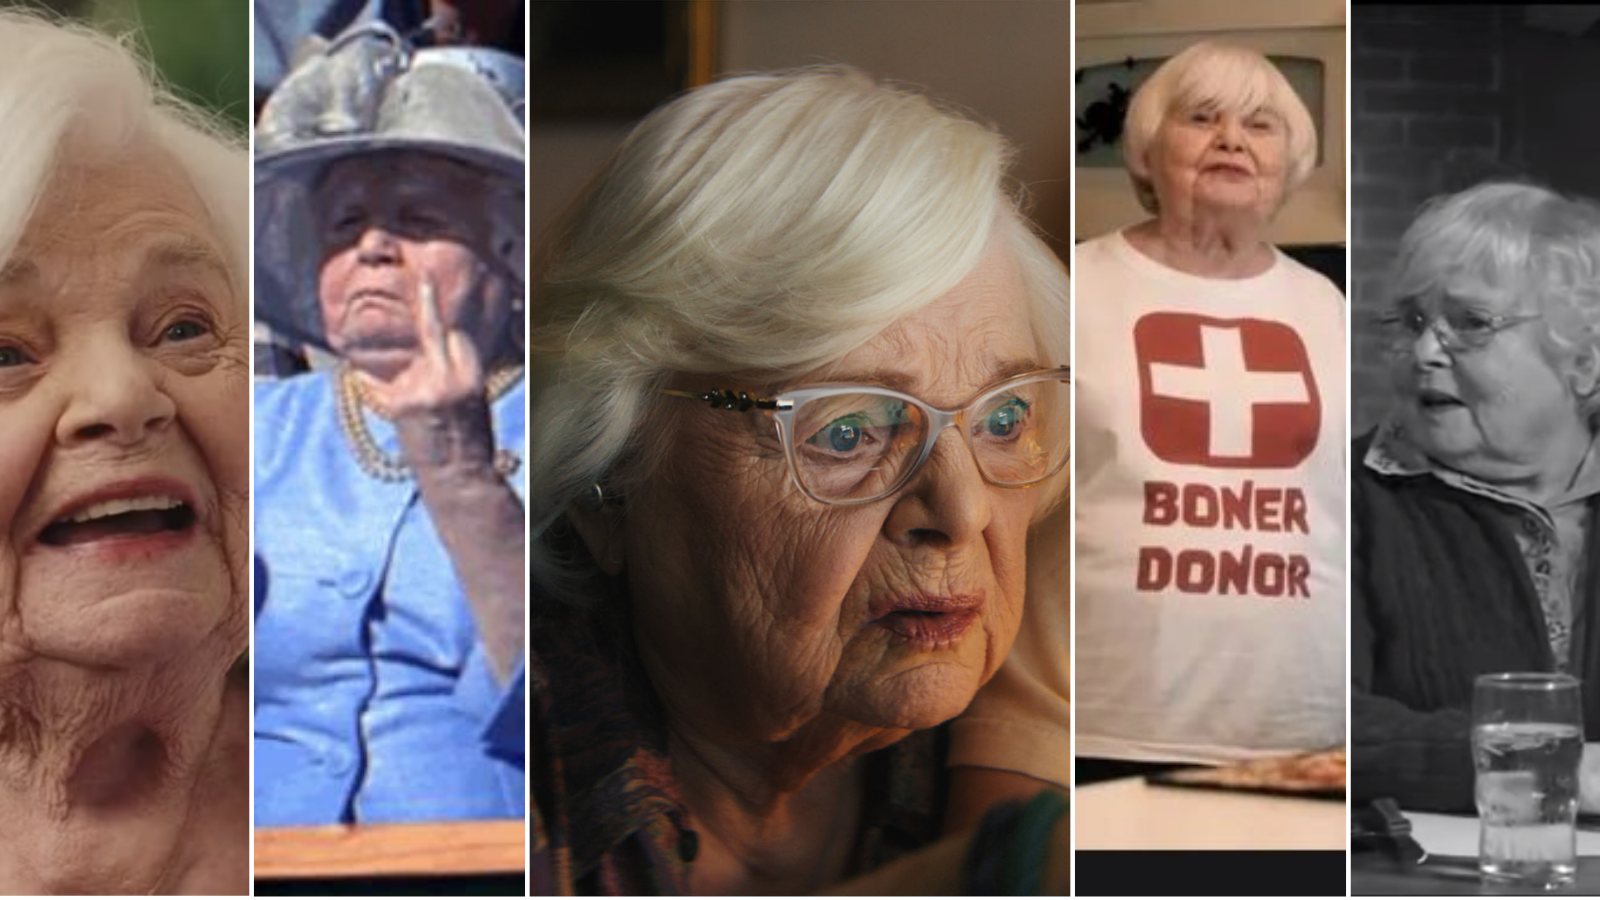 Five Roles that Made SIFF Fall in Love with June Squibb